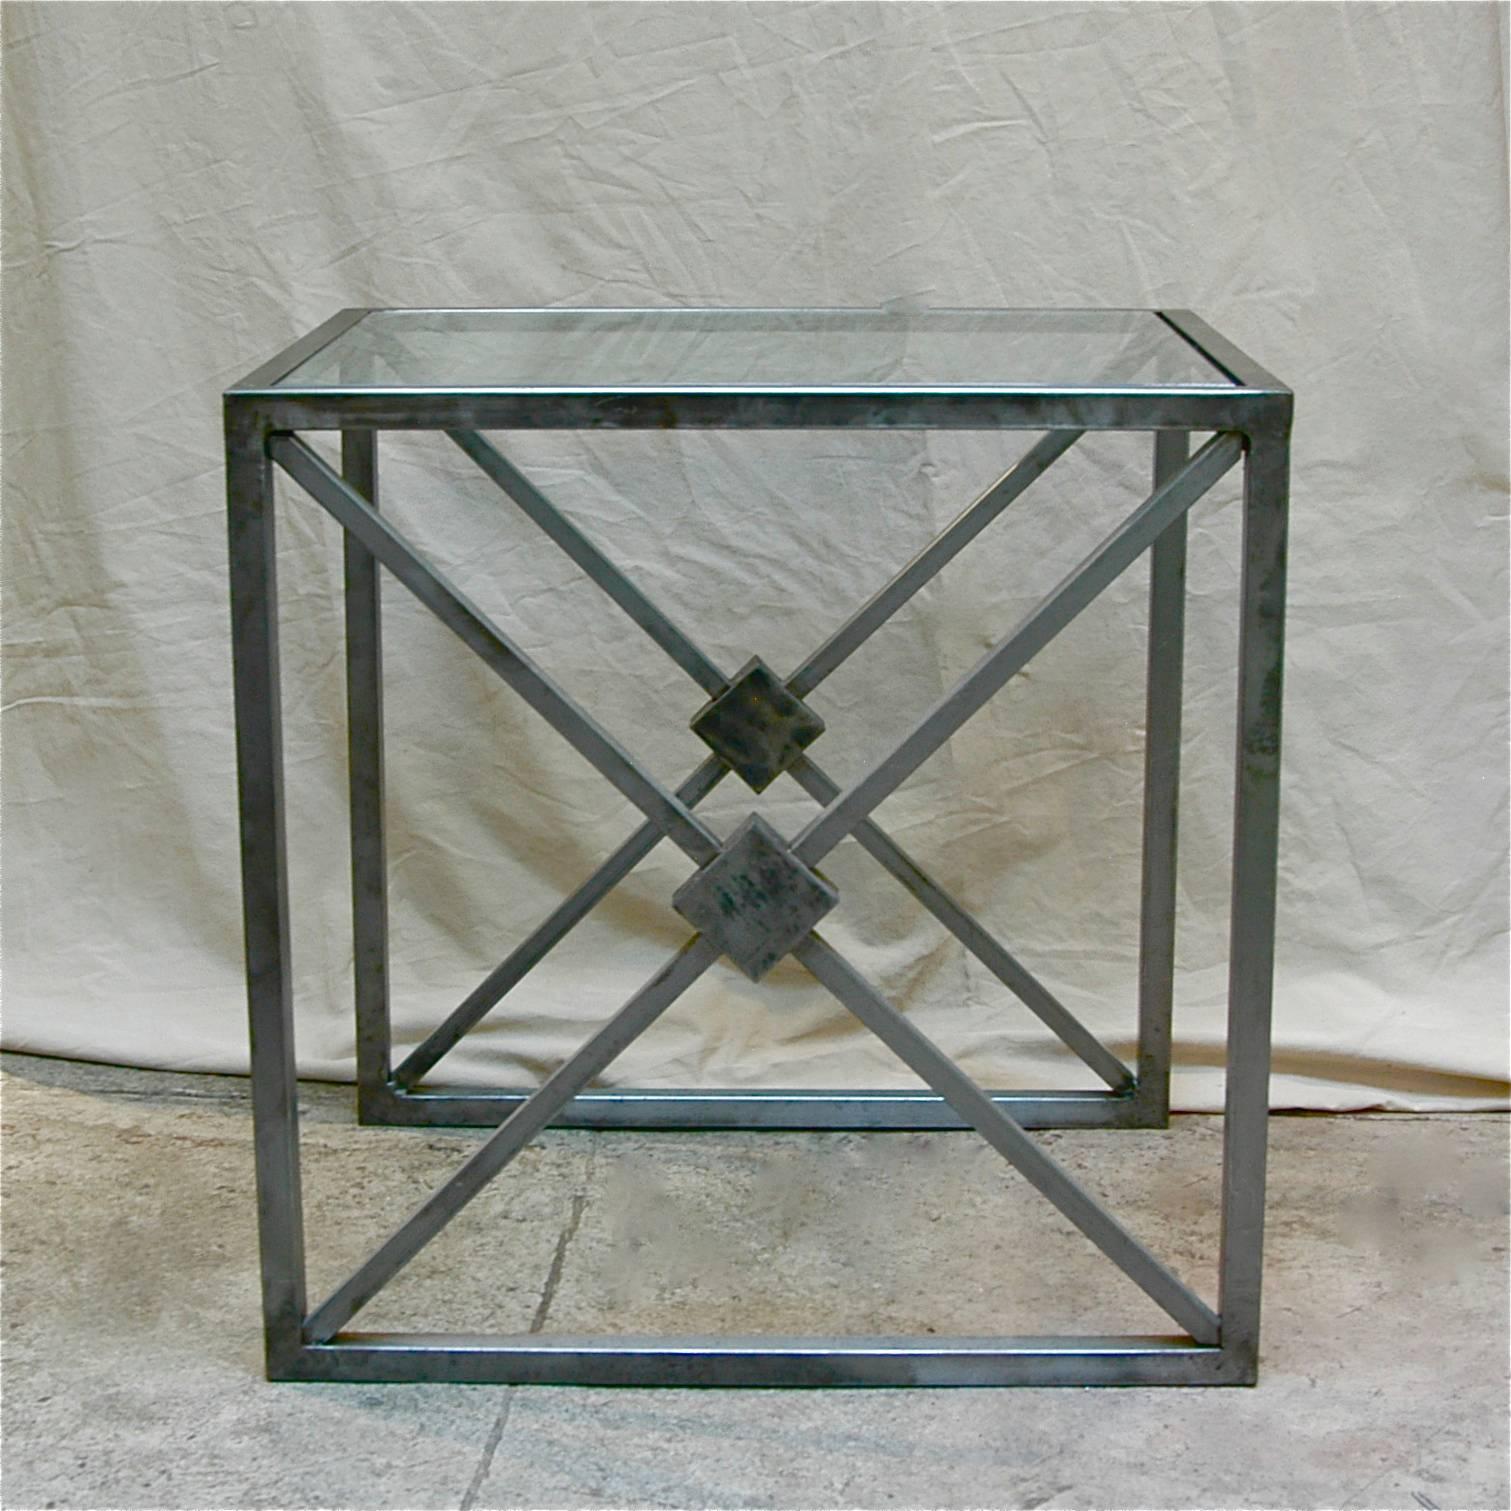 Hollywood Regency side table with brushed steel frame and glass top.